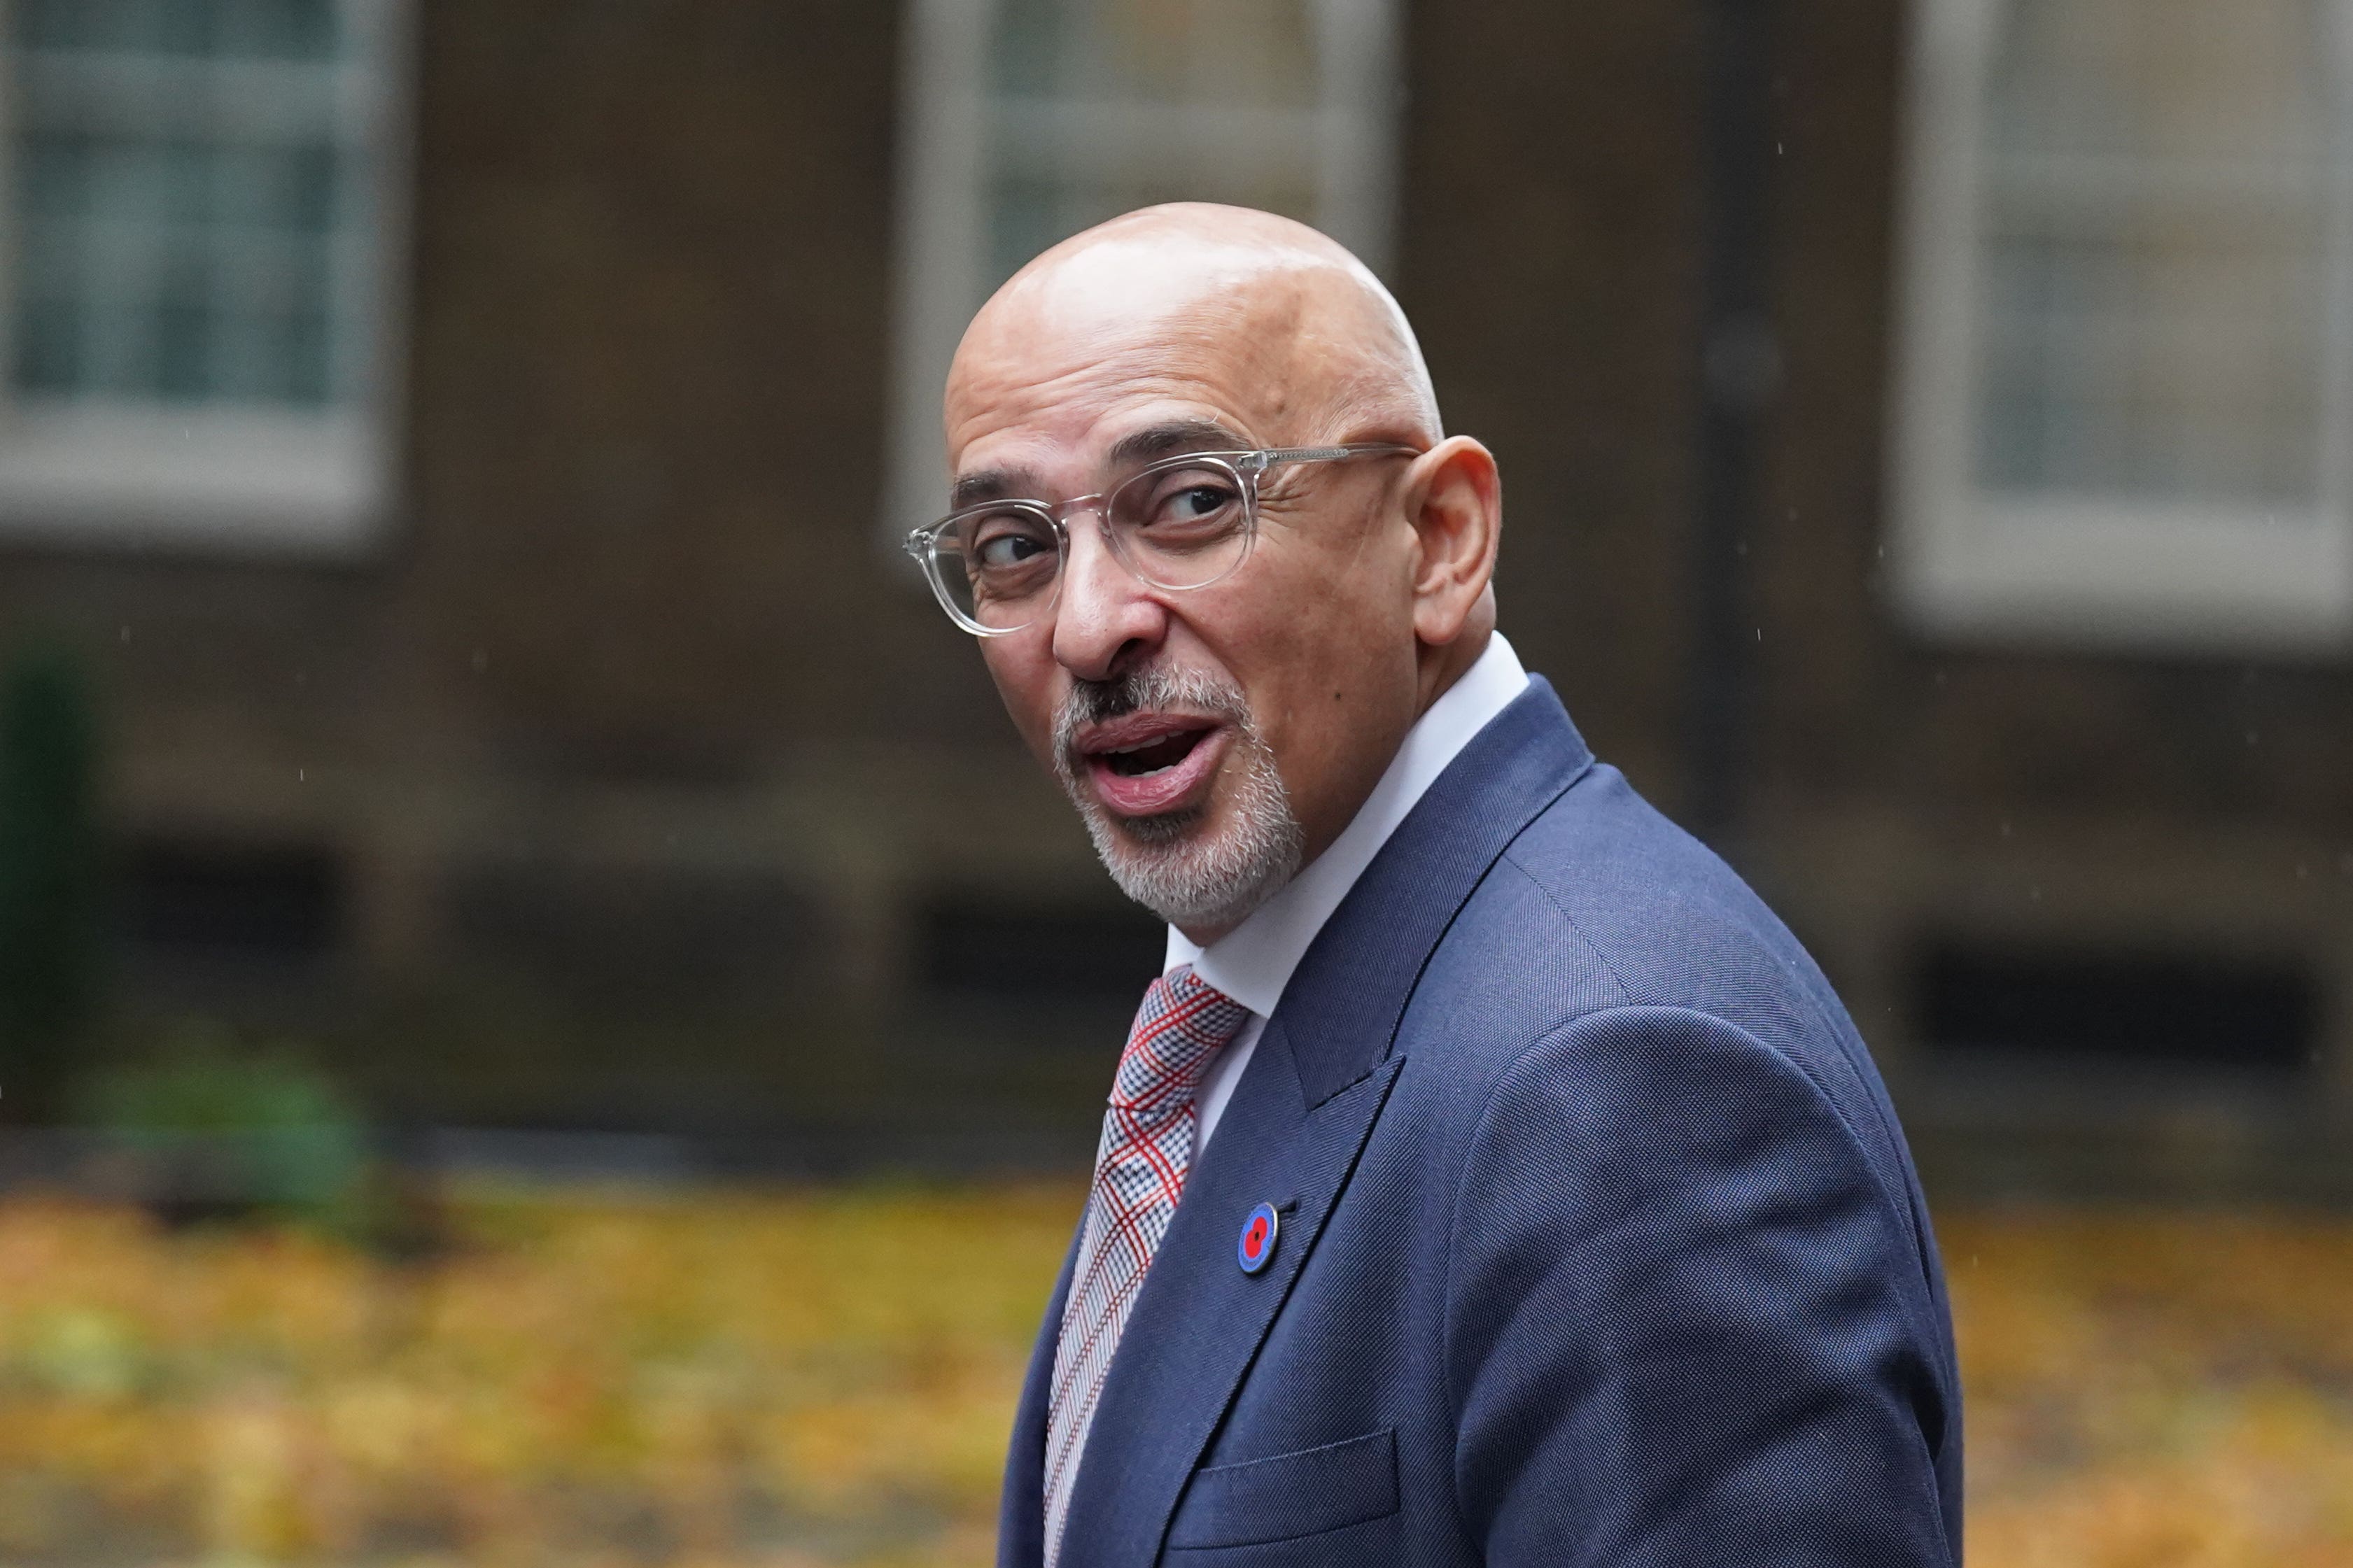 Nadhim Zahawi said tax chiefs found he had made a ‘careless but not deliberate’ error